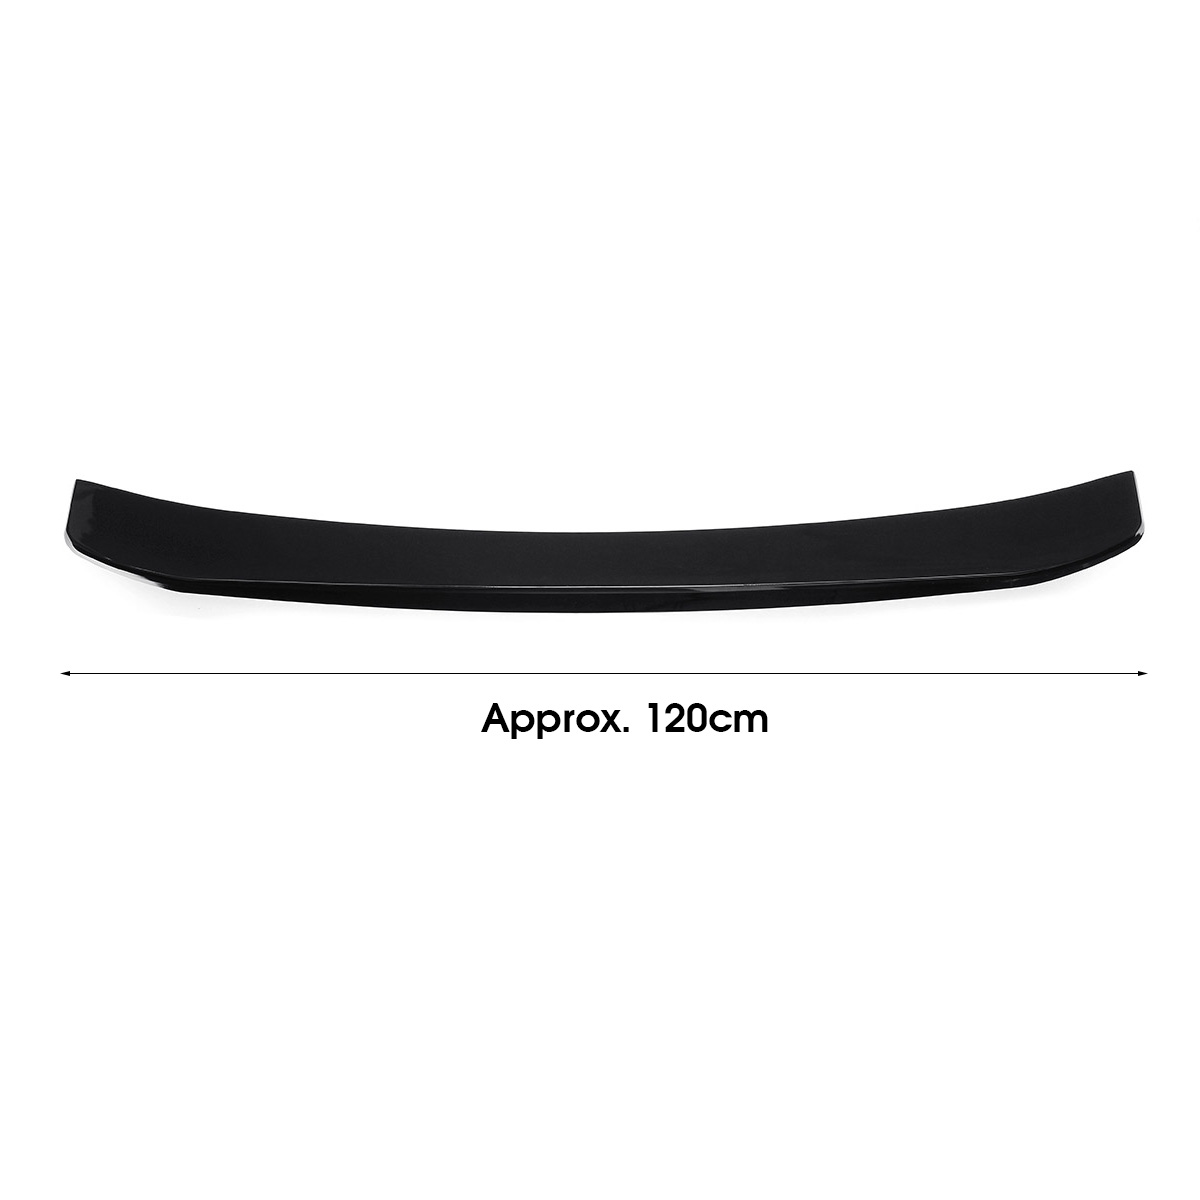 Unpainted-ABS-Plastic-Black-Trunk-Spoiler-Lip-Flying-Wing-Car-Tail-Fit-For-Ford-Mondeo-2013-2018-1476554